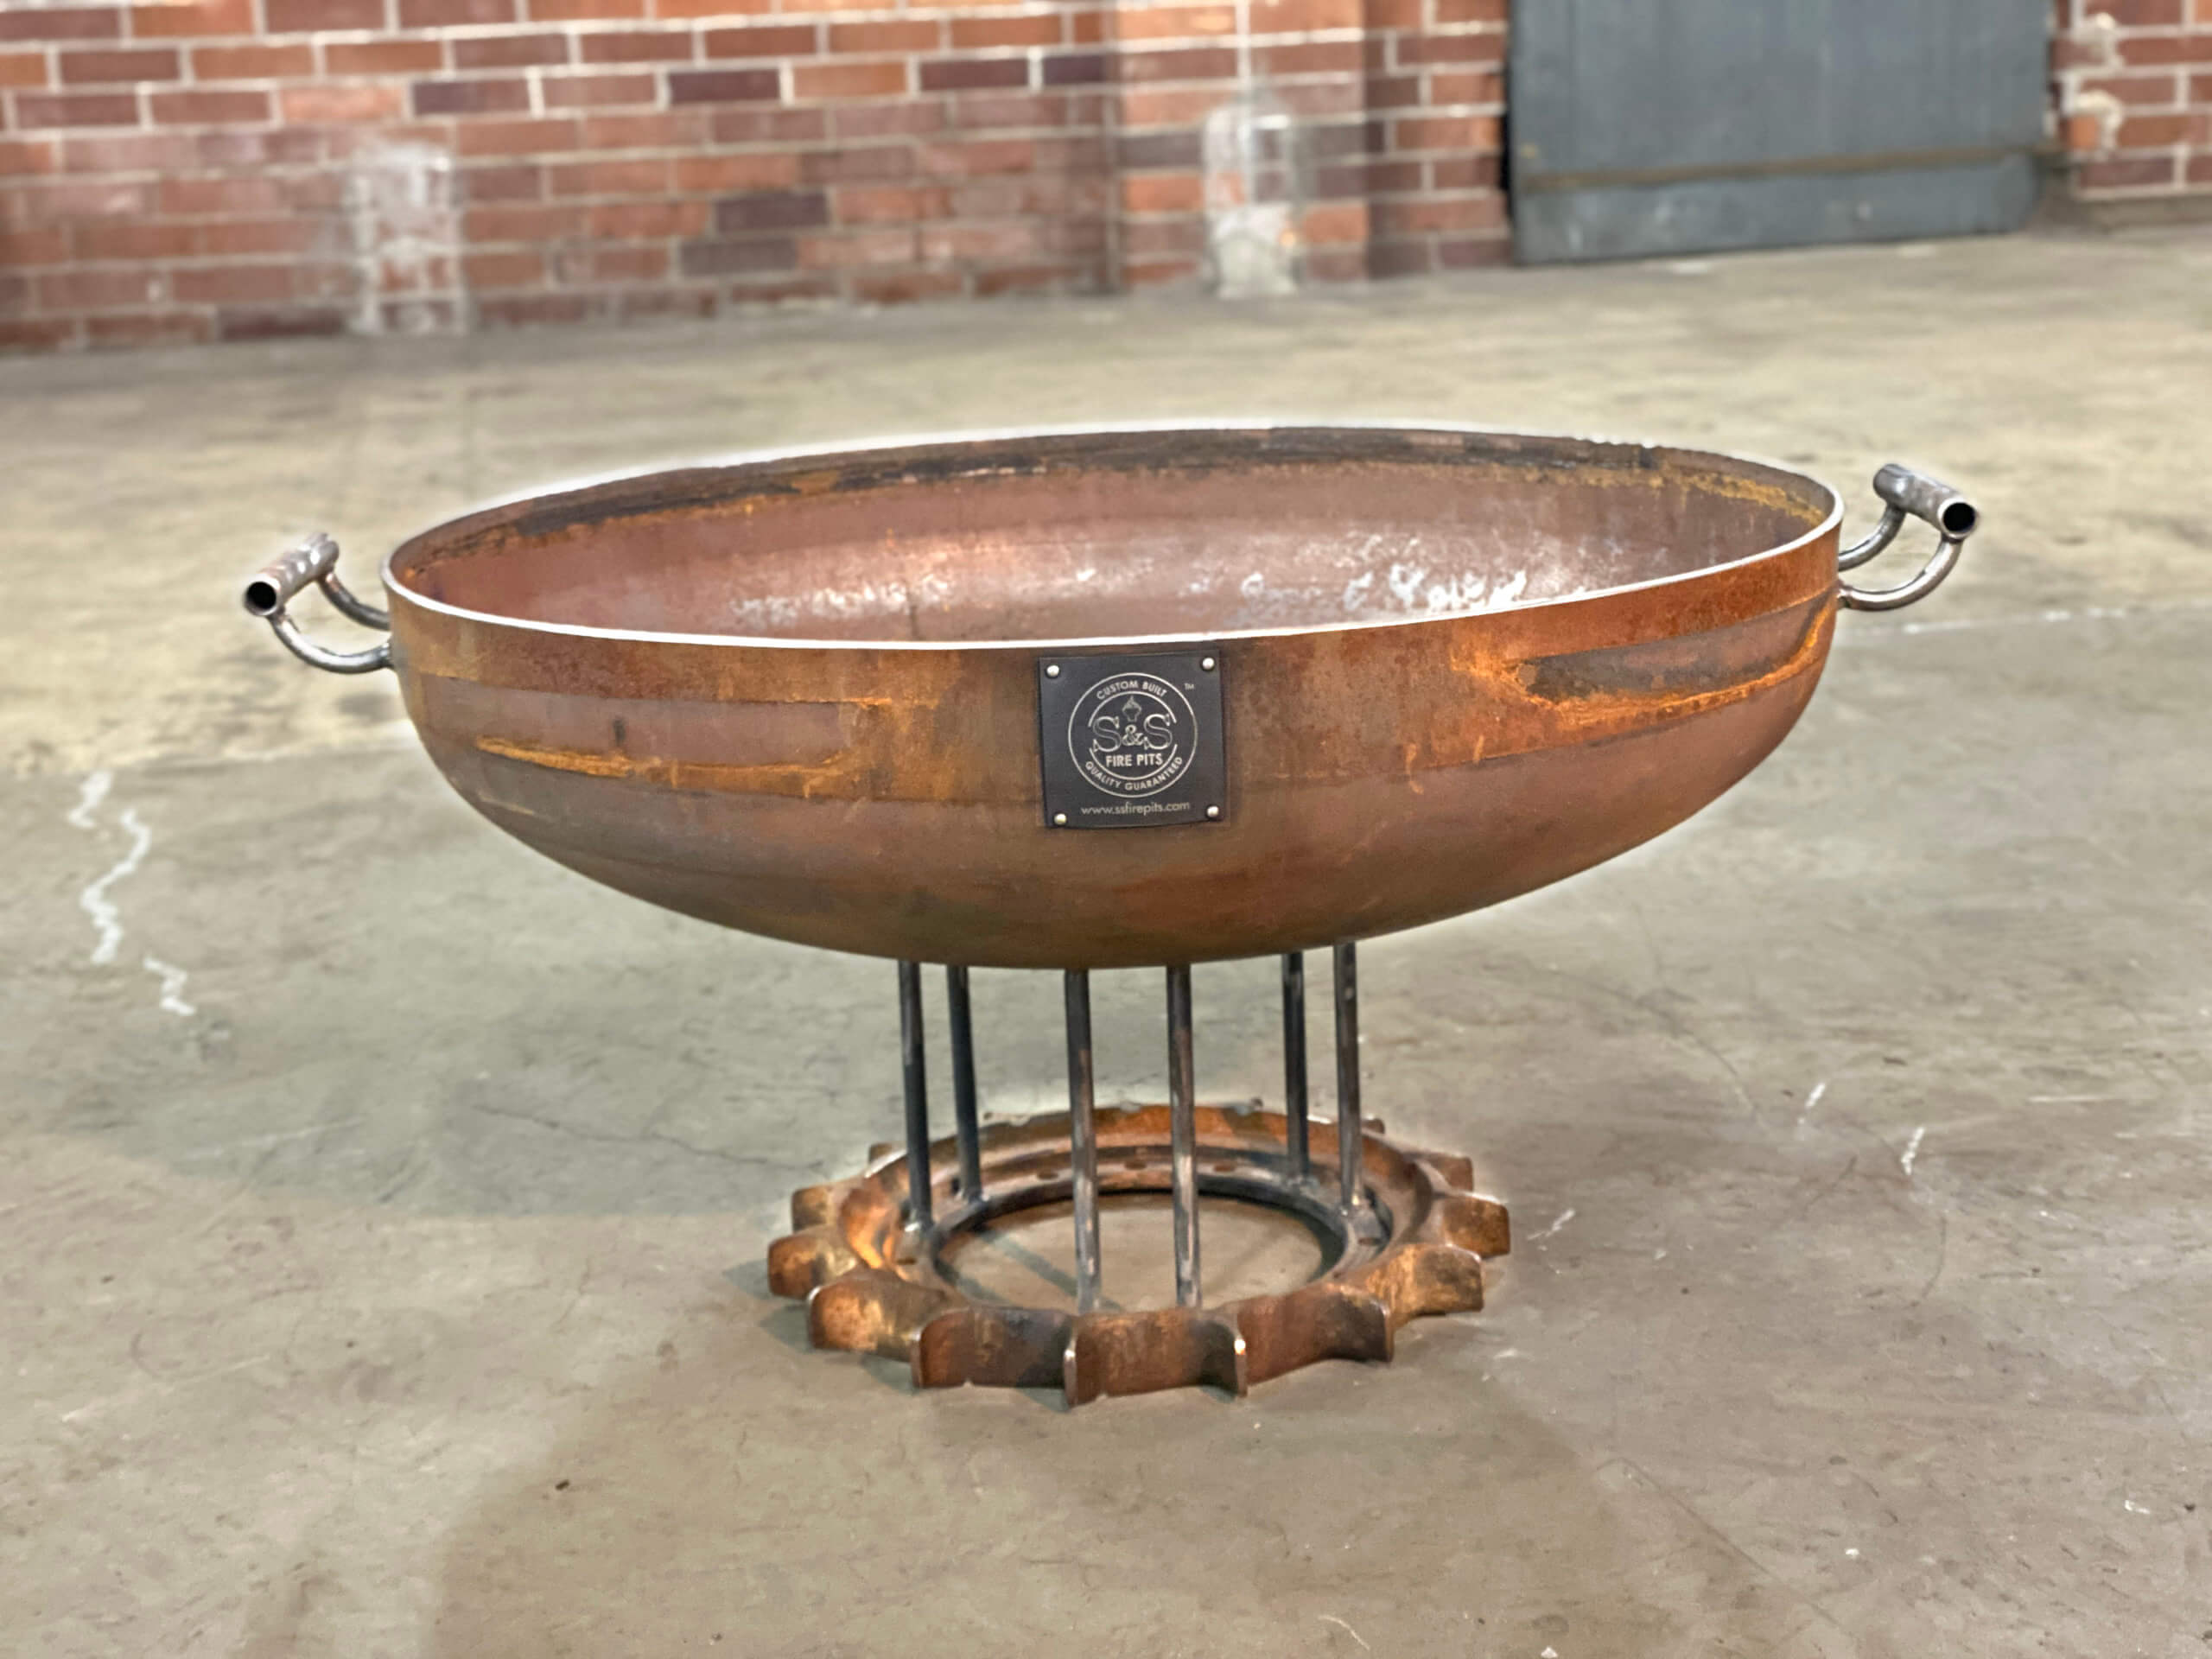 elliptical one off fire pit